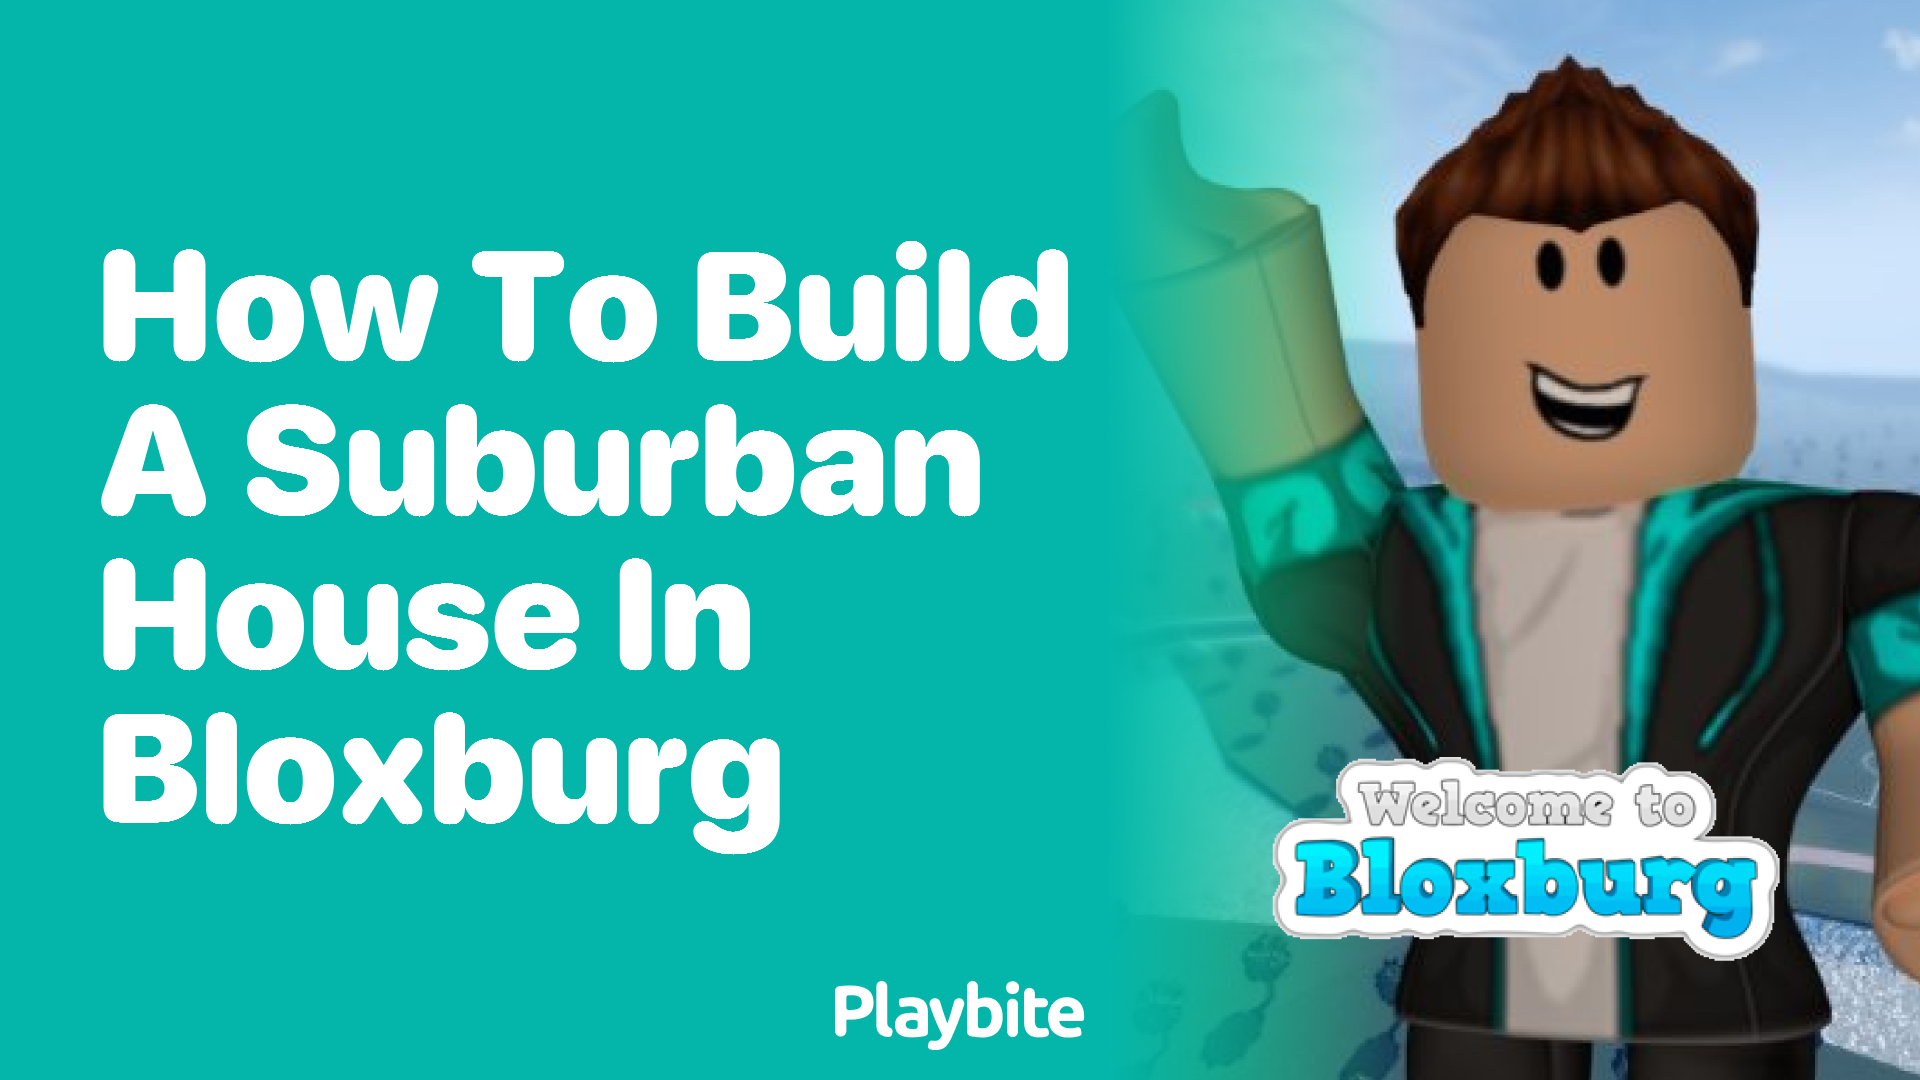 How to Build a Suburban House in Bloxburg